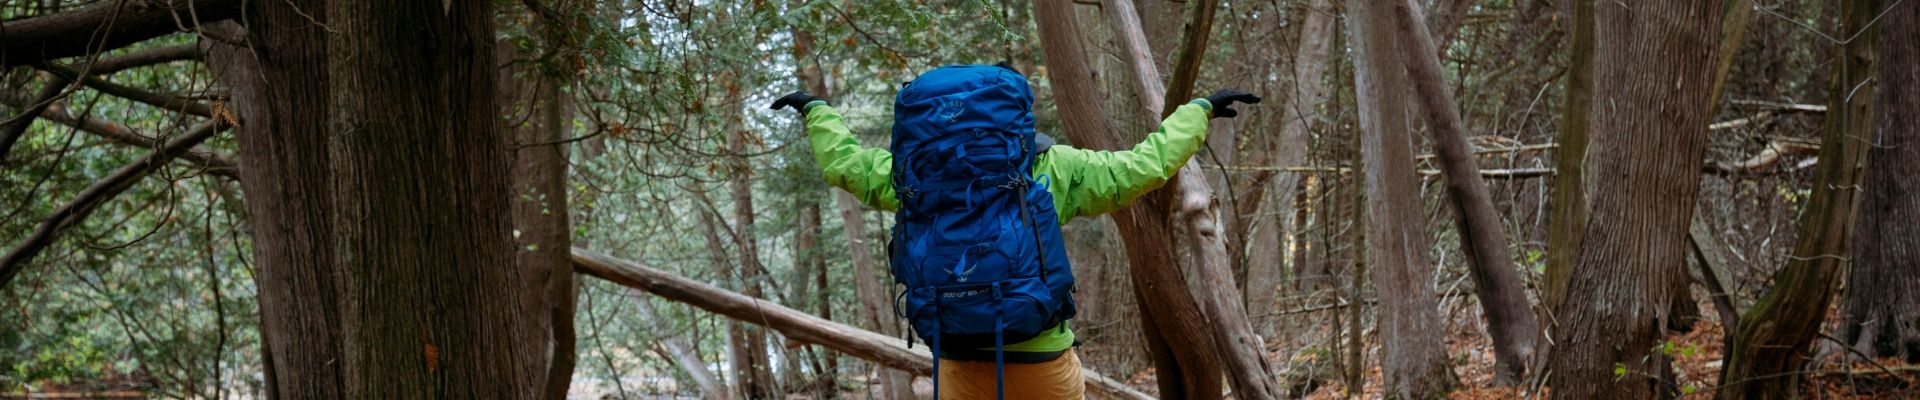 Bags & Packs | Wild Rock Outfitters